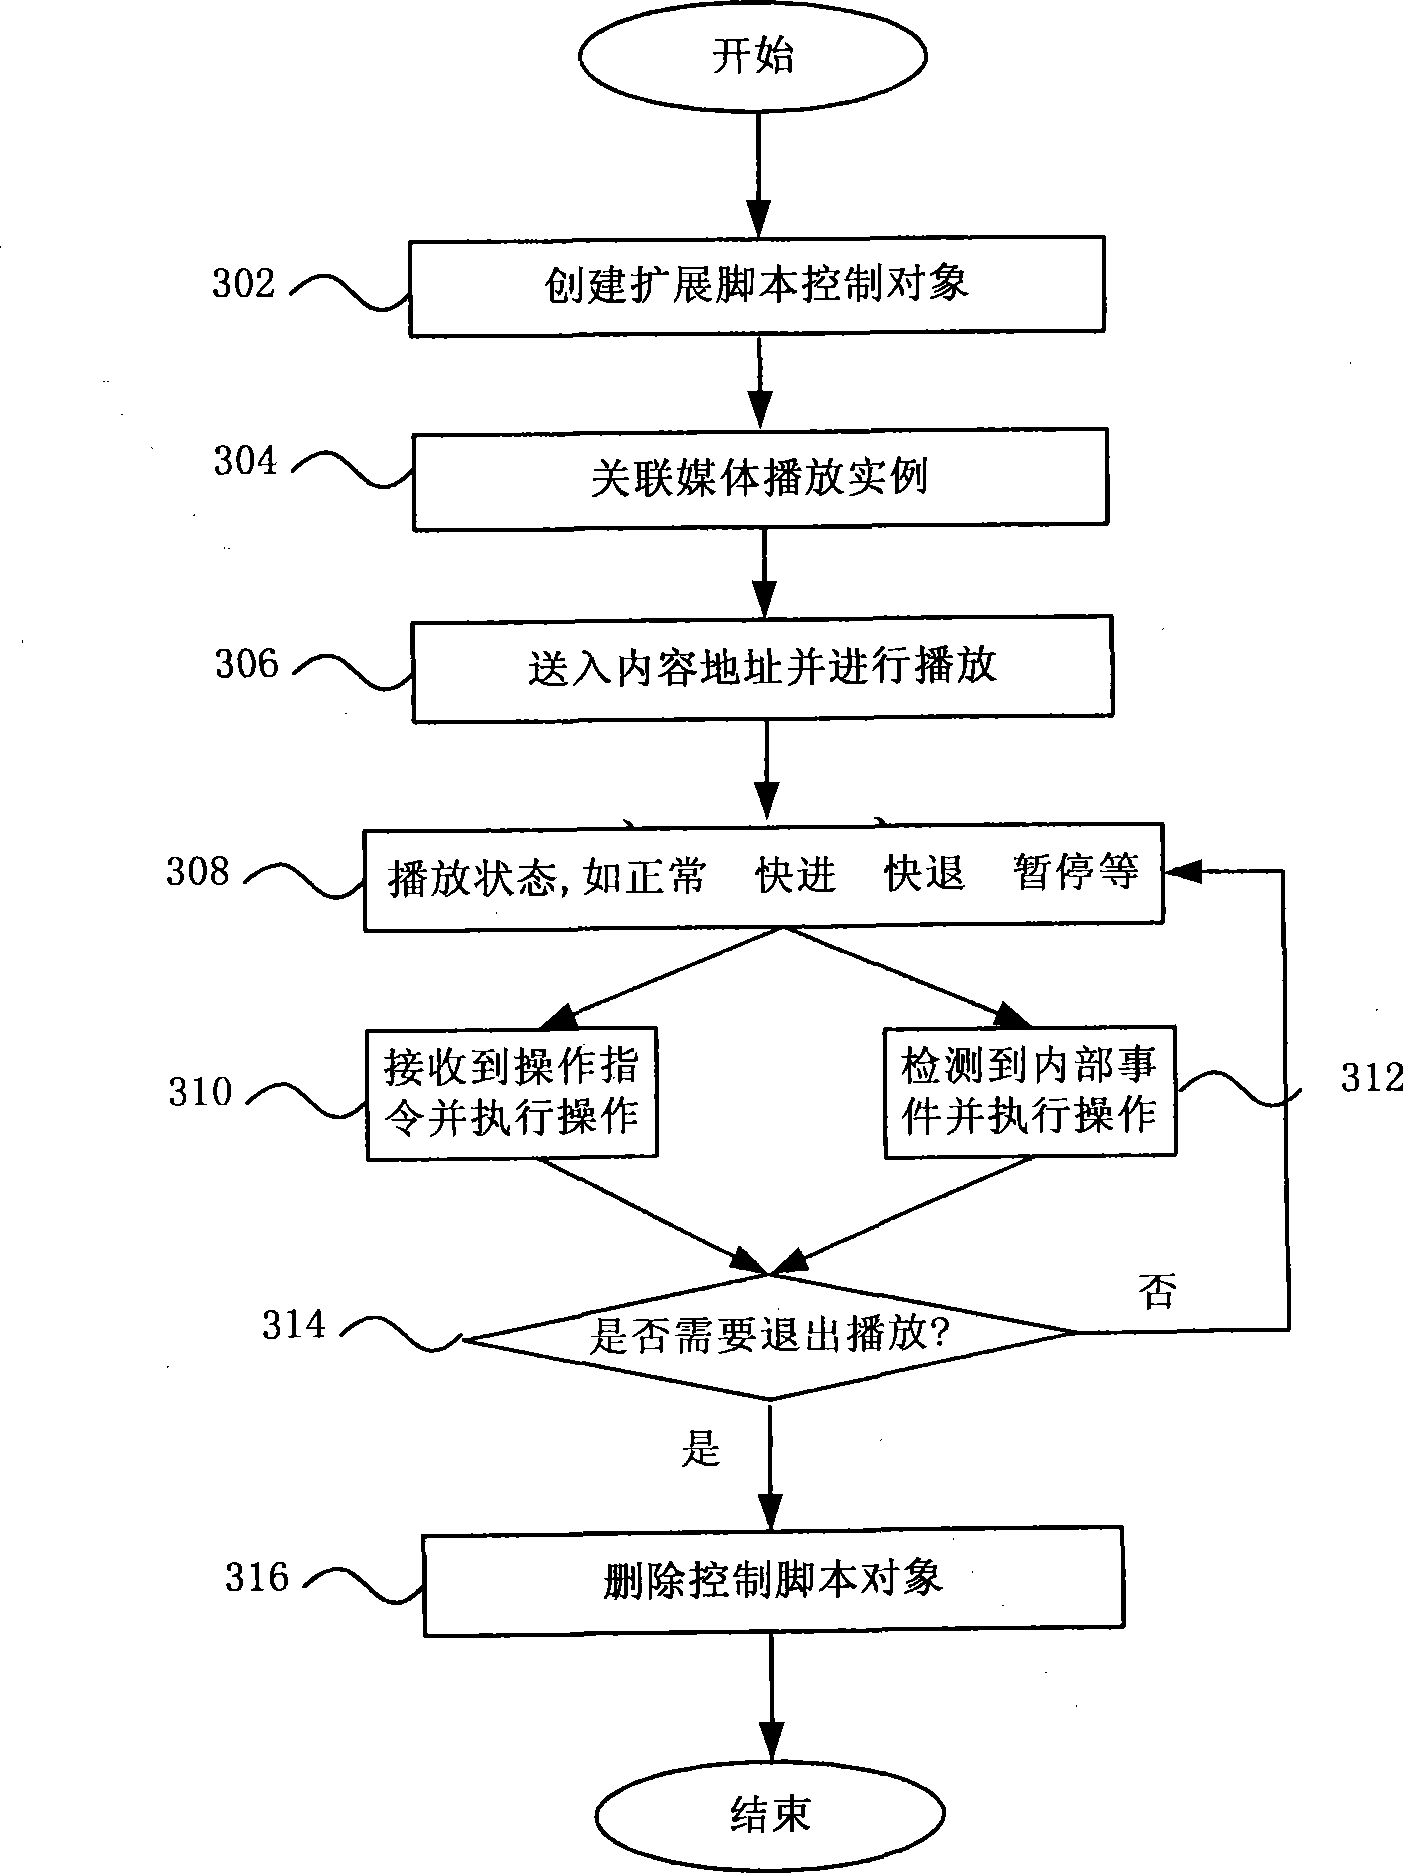 Method, system and set-top box for network television video play control